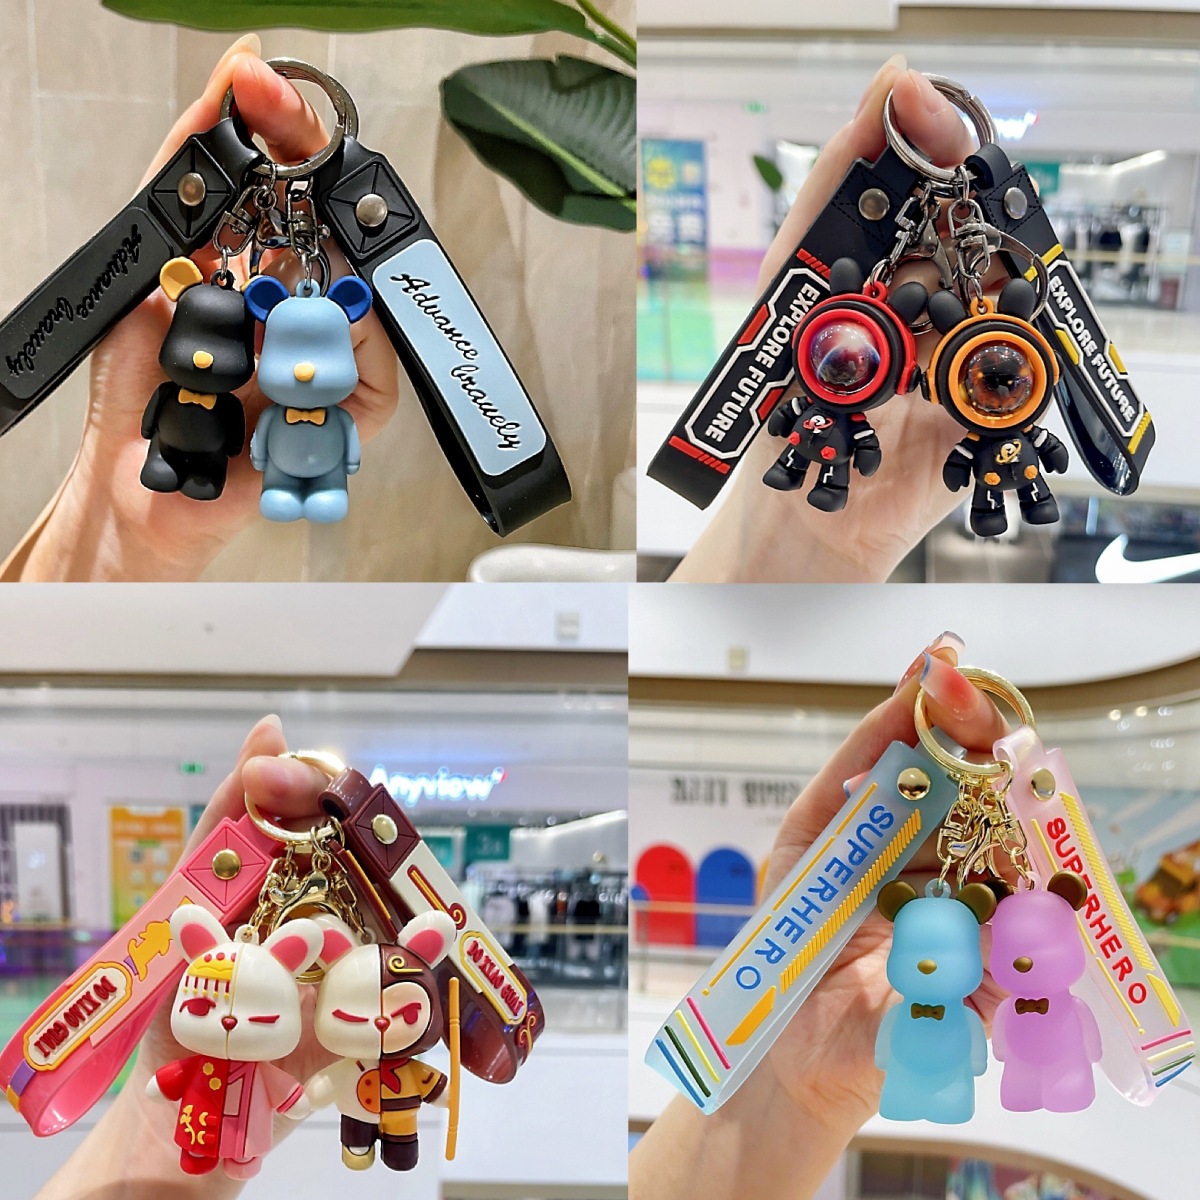 trending creative nordic bear key chain small gift wholesale couple bags pendant car key ring accessories